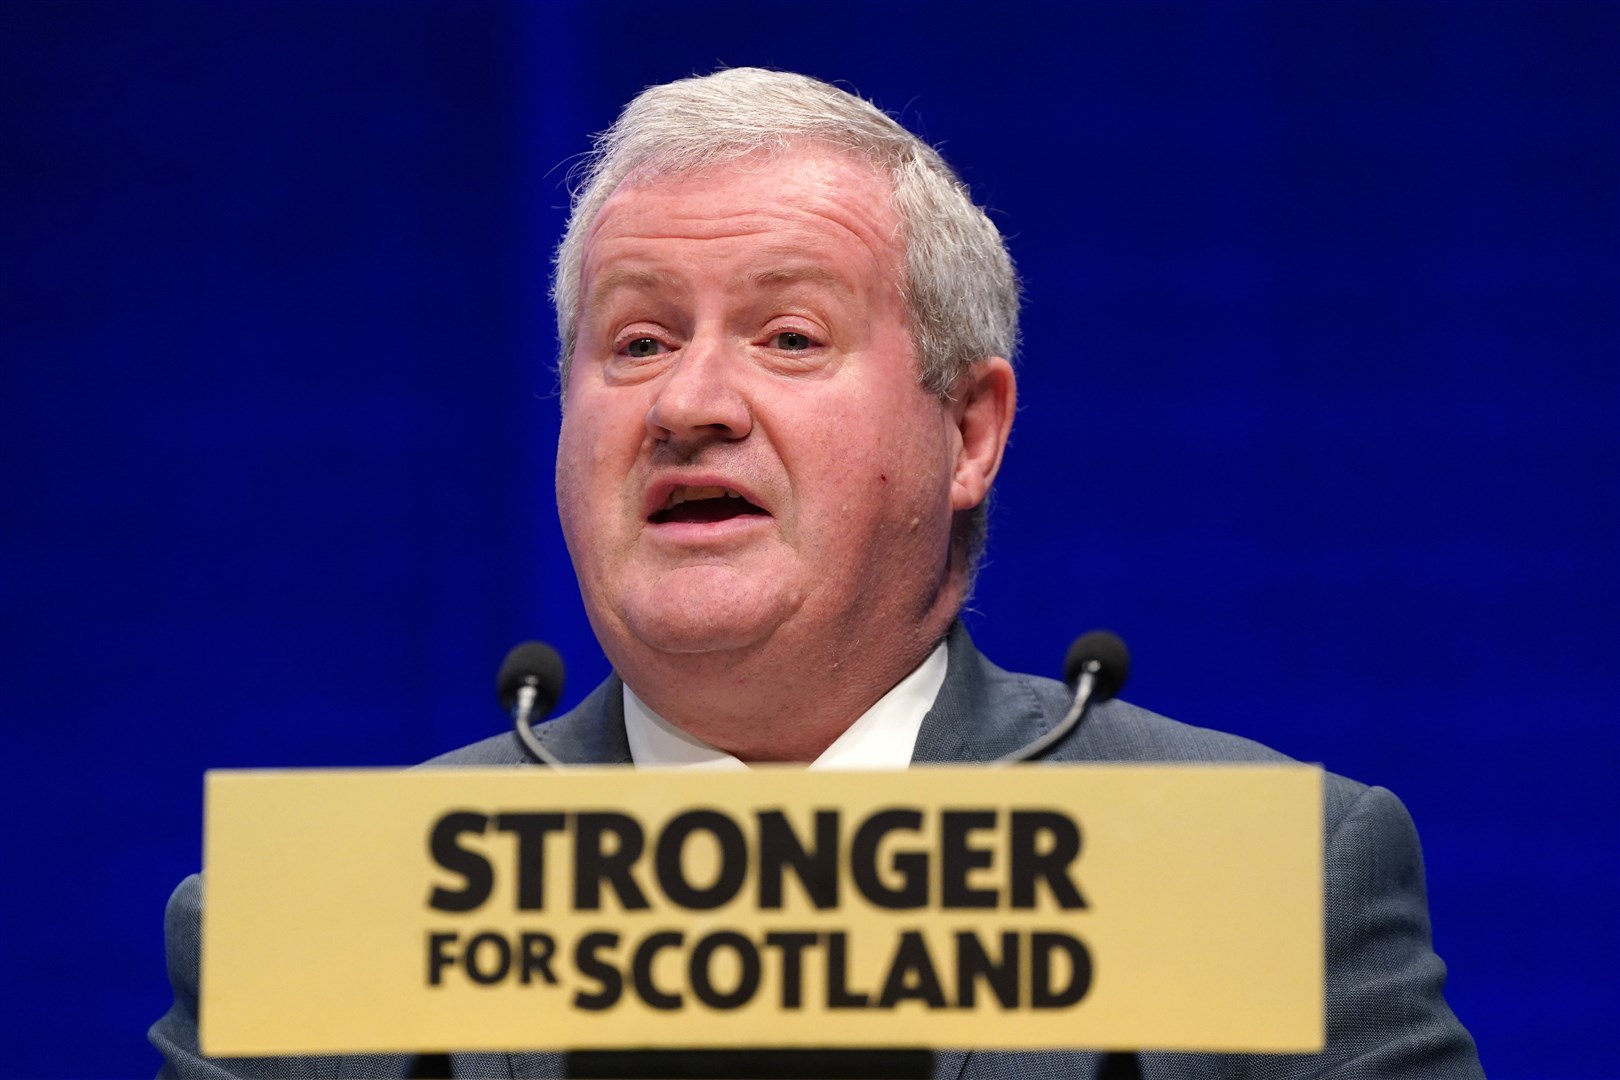 Ian Blackford was heard on a recording urging MPs to support Mr Grady during his suspension from the party (Andrew Milligan/PA)